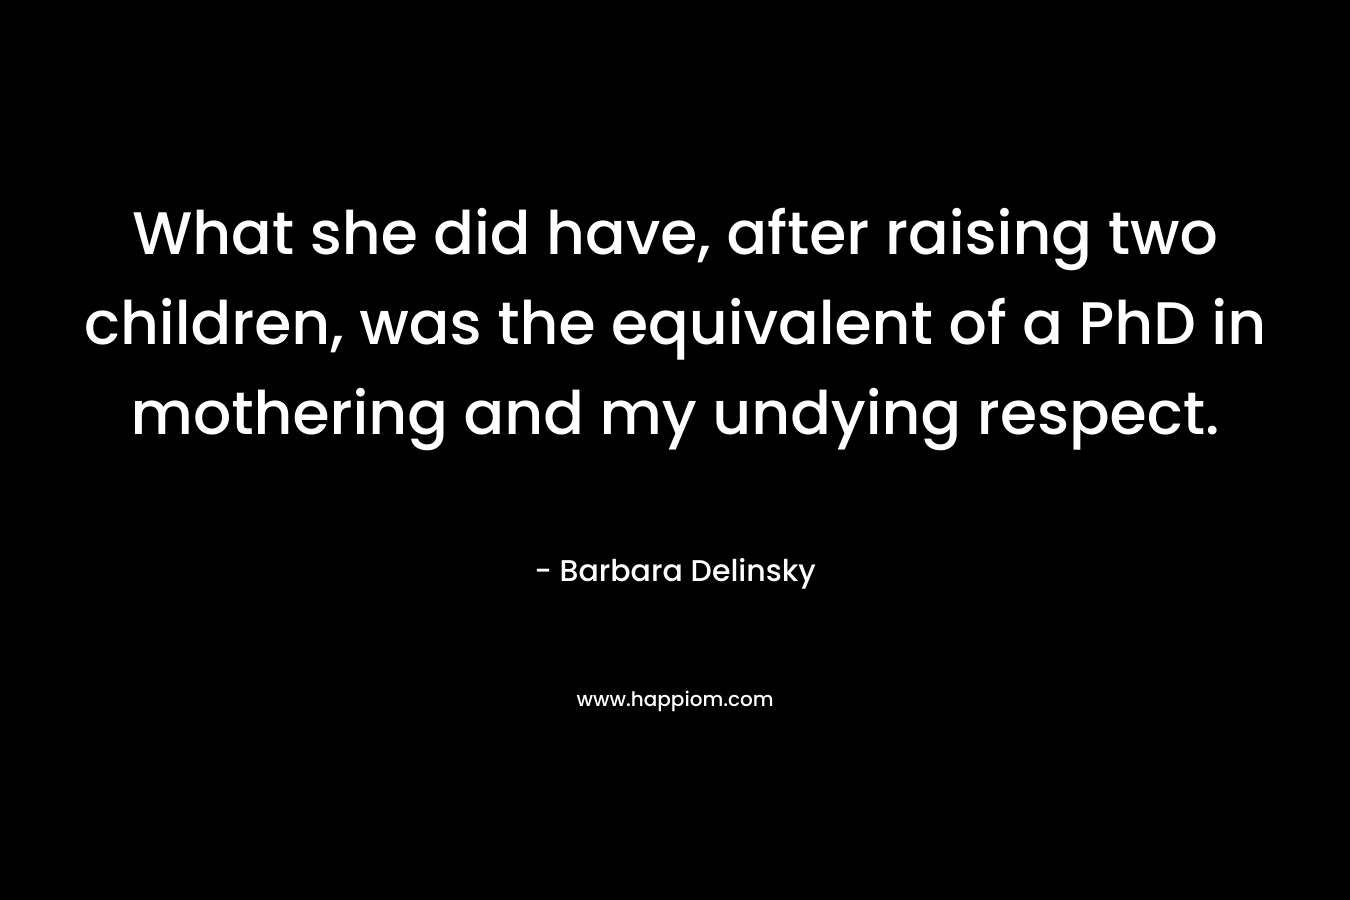 What she did have, after raising two children, was the equivalent of a PhD in mothering and my undying respect. – Barbara Delinsky